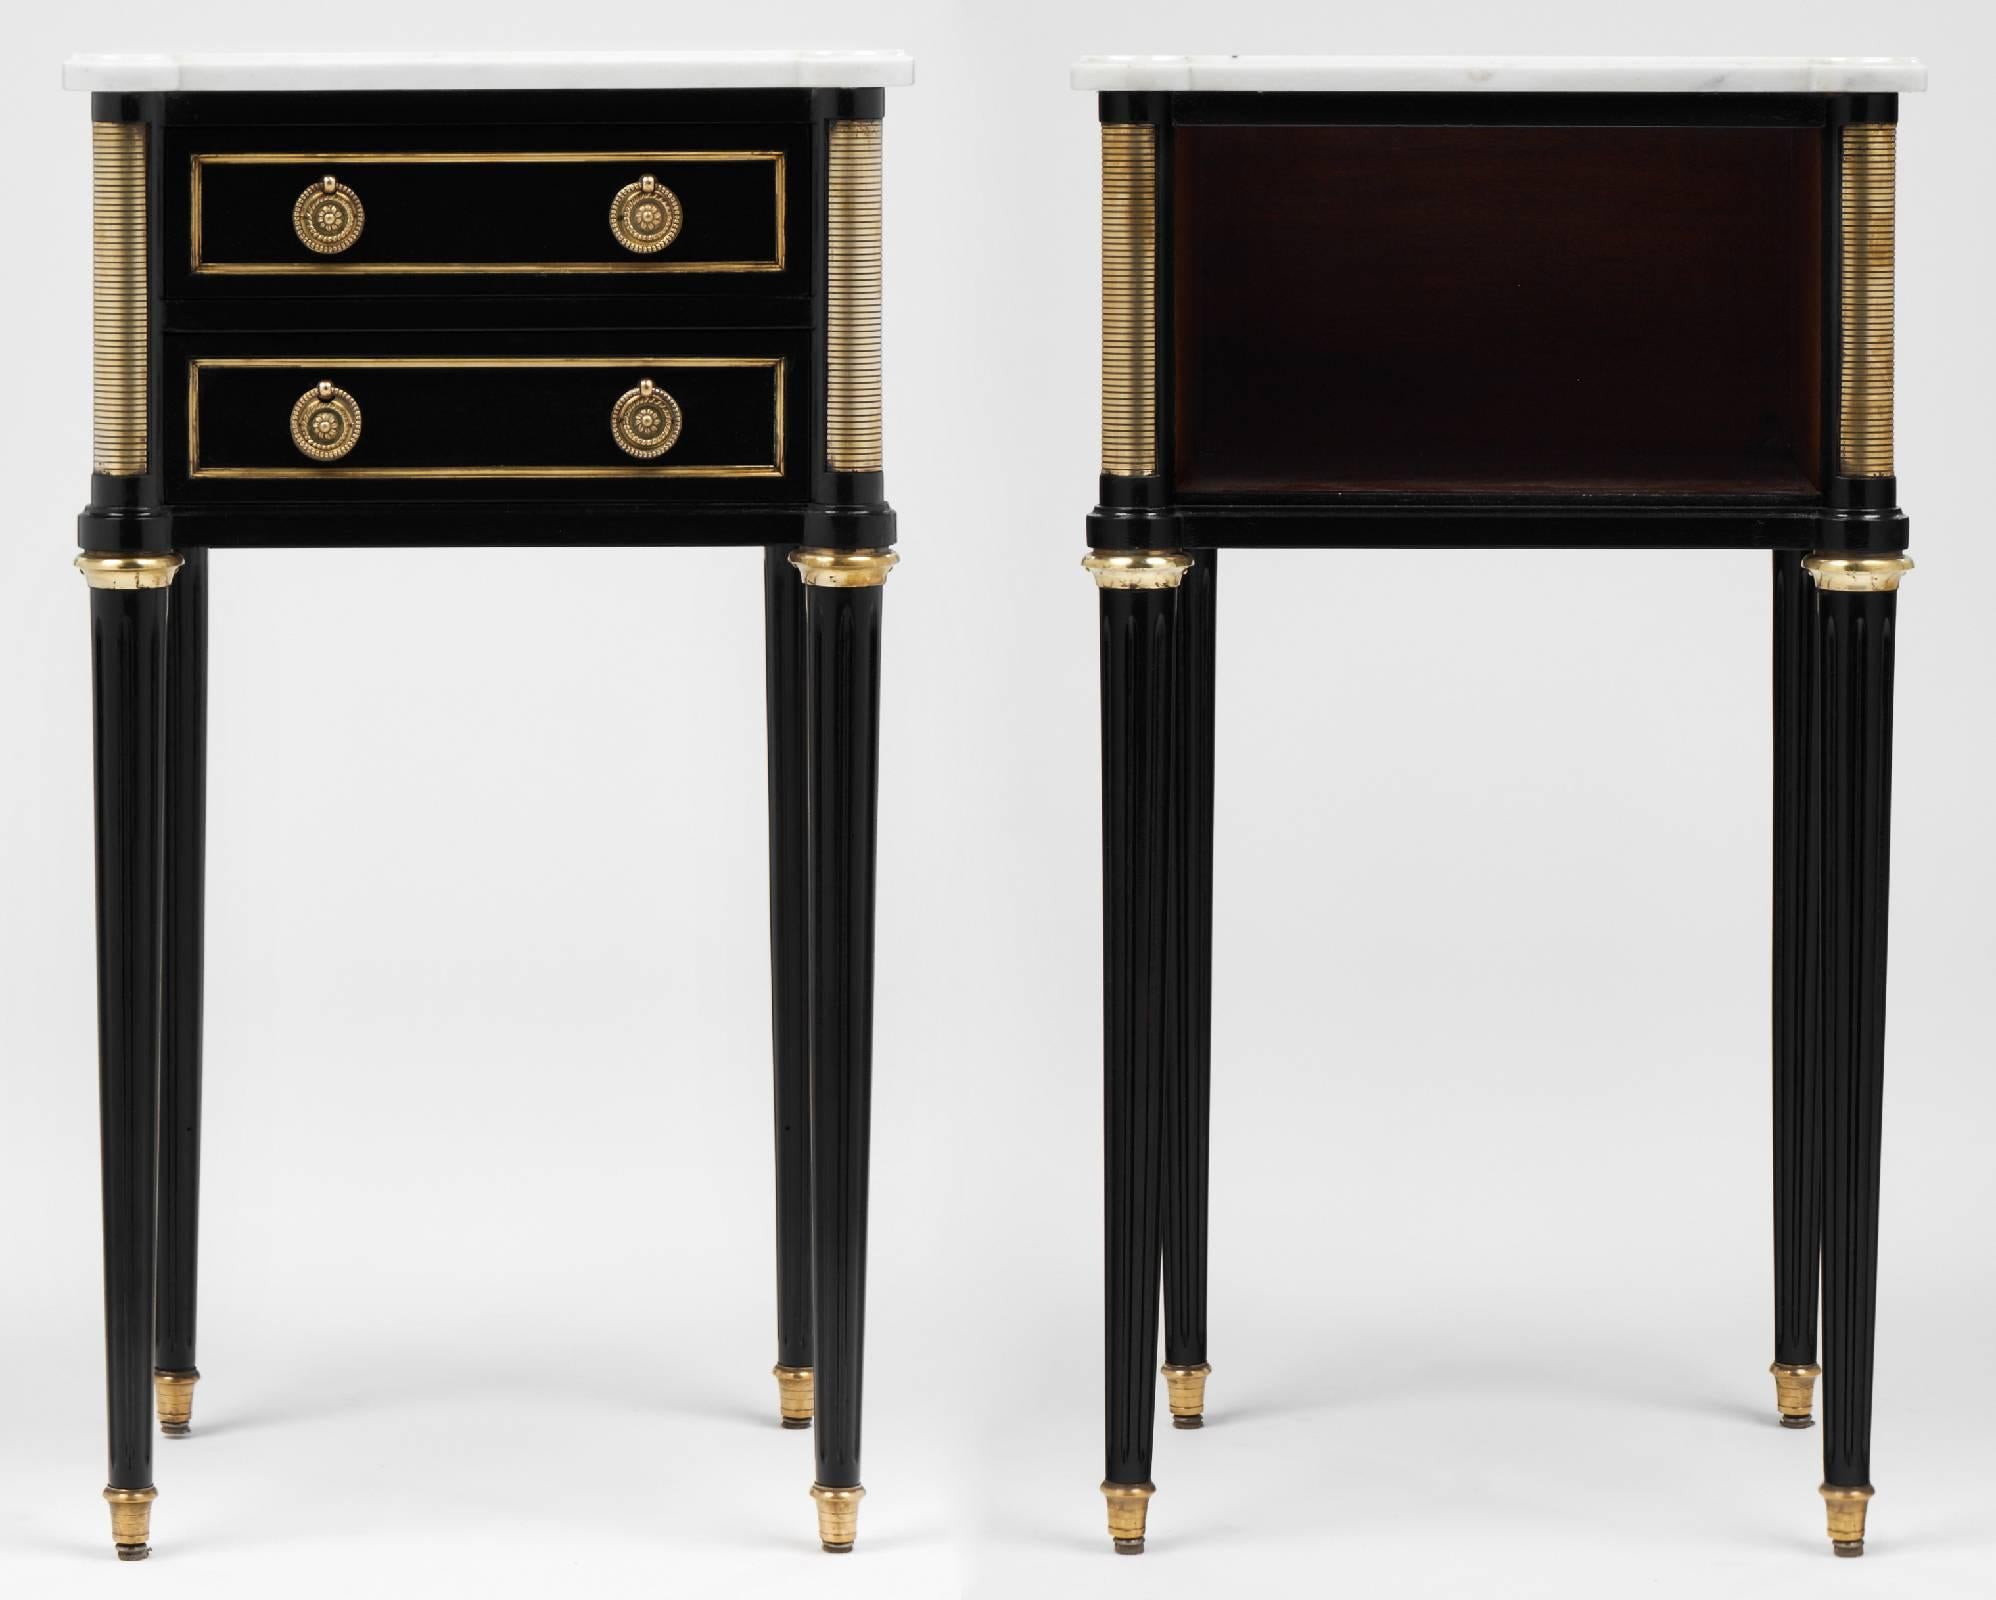 French vintage pair of nightstands in the classic and elegant style of Louis XVI, with clean lines, polished style, and tapered legs. Pristine Carrara marble tops and gilt brass trim gleam against black lacquered mahogany on this set of side tables.